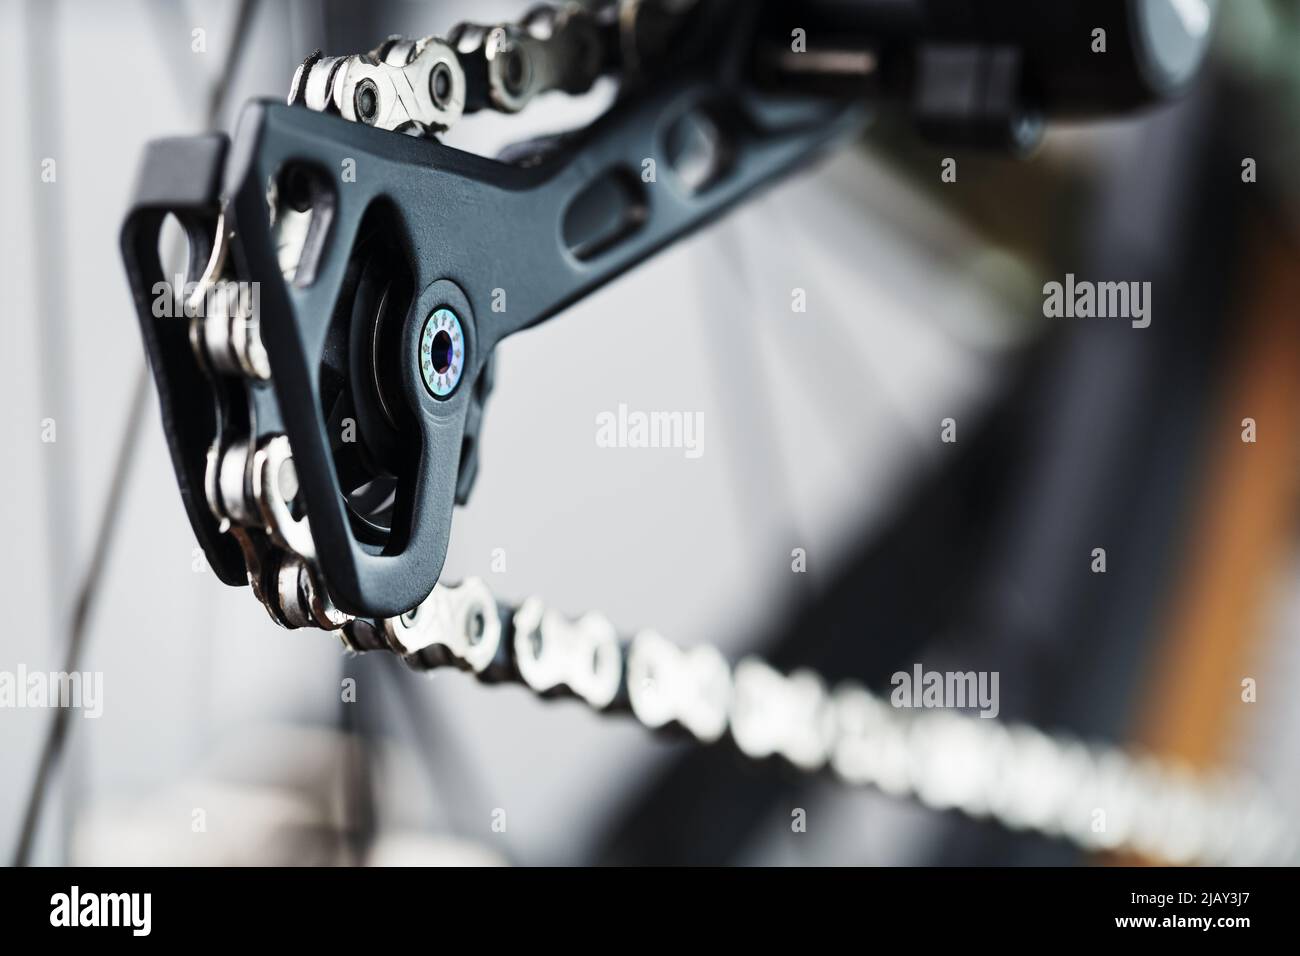 Rear bicycle speed switch with cassette and chain, accessories for bike repair and tuning Stock Photo